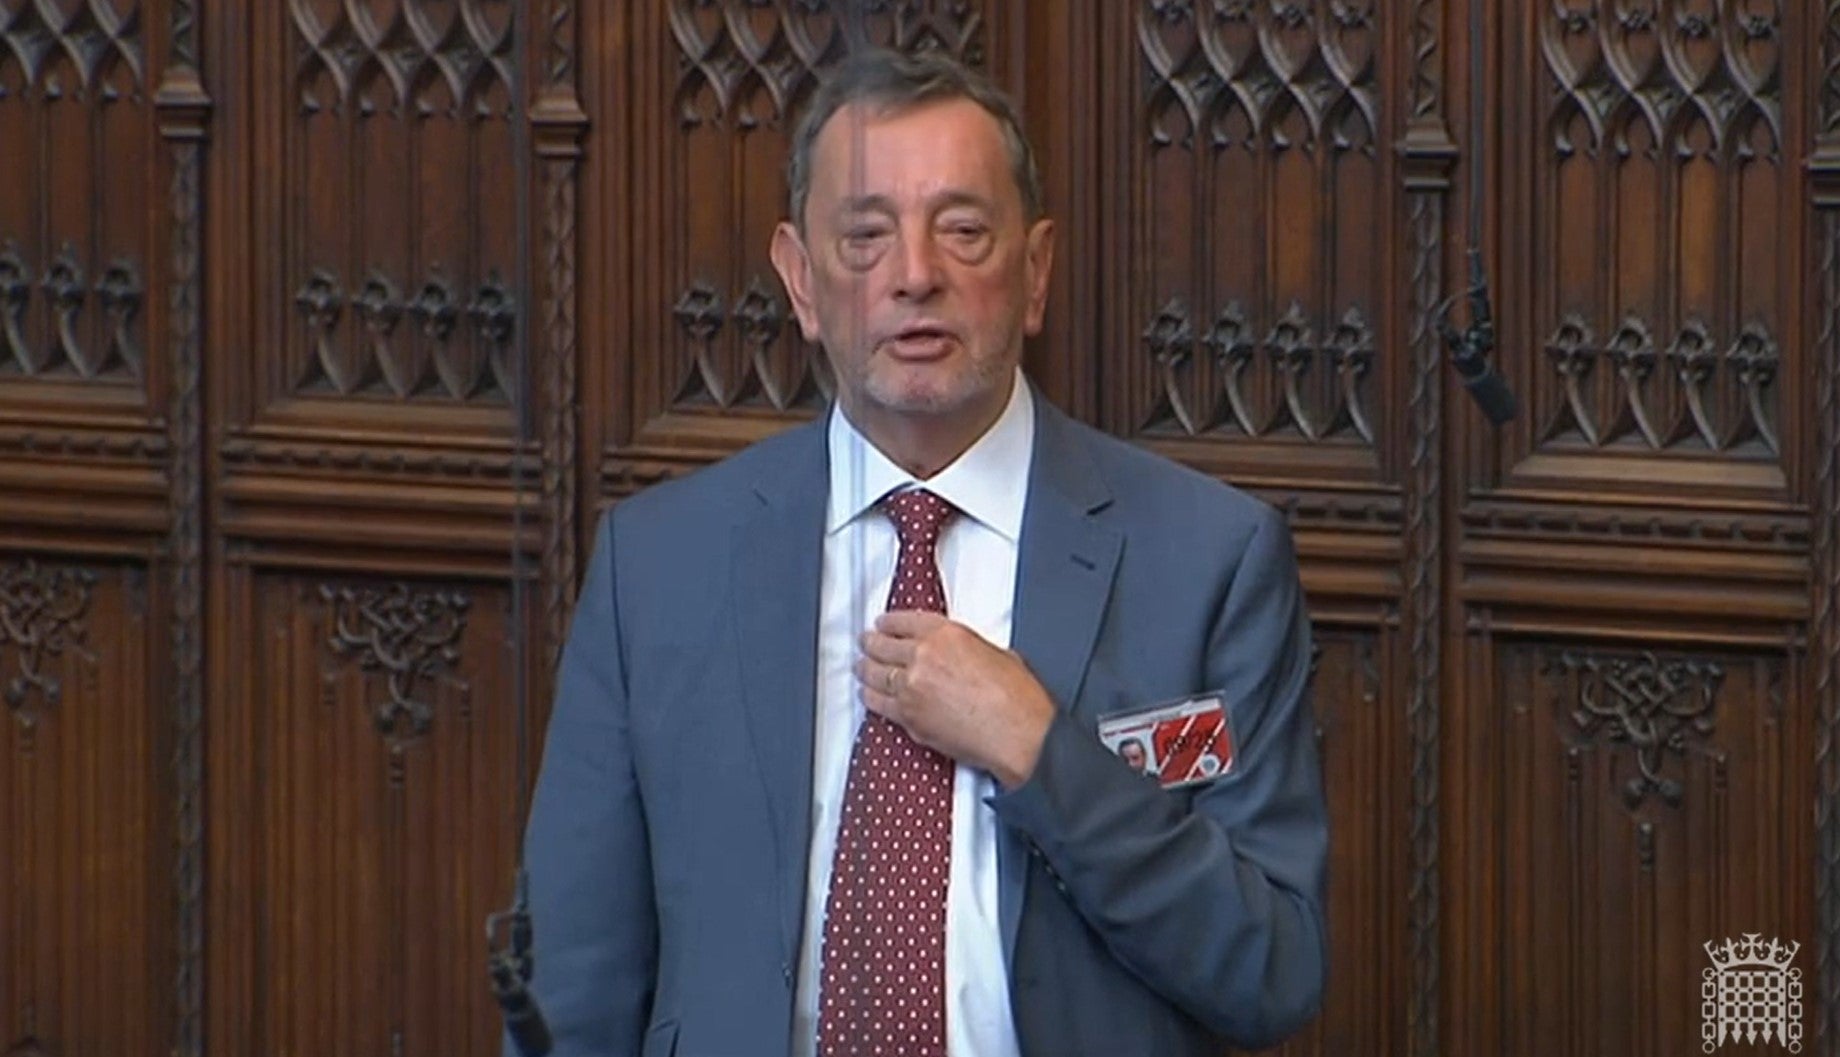 Labour’s Lord Blunkett during a speech to the House of Lords (House of Lords/PA)